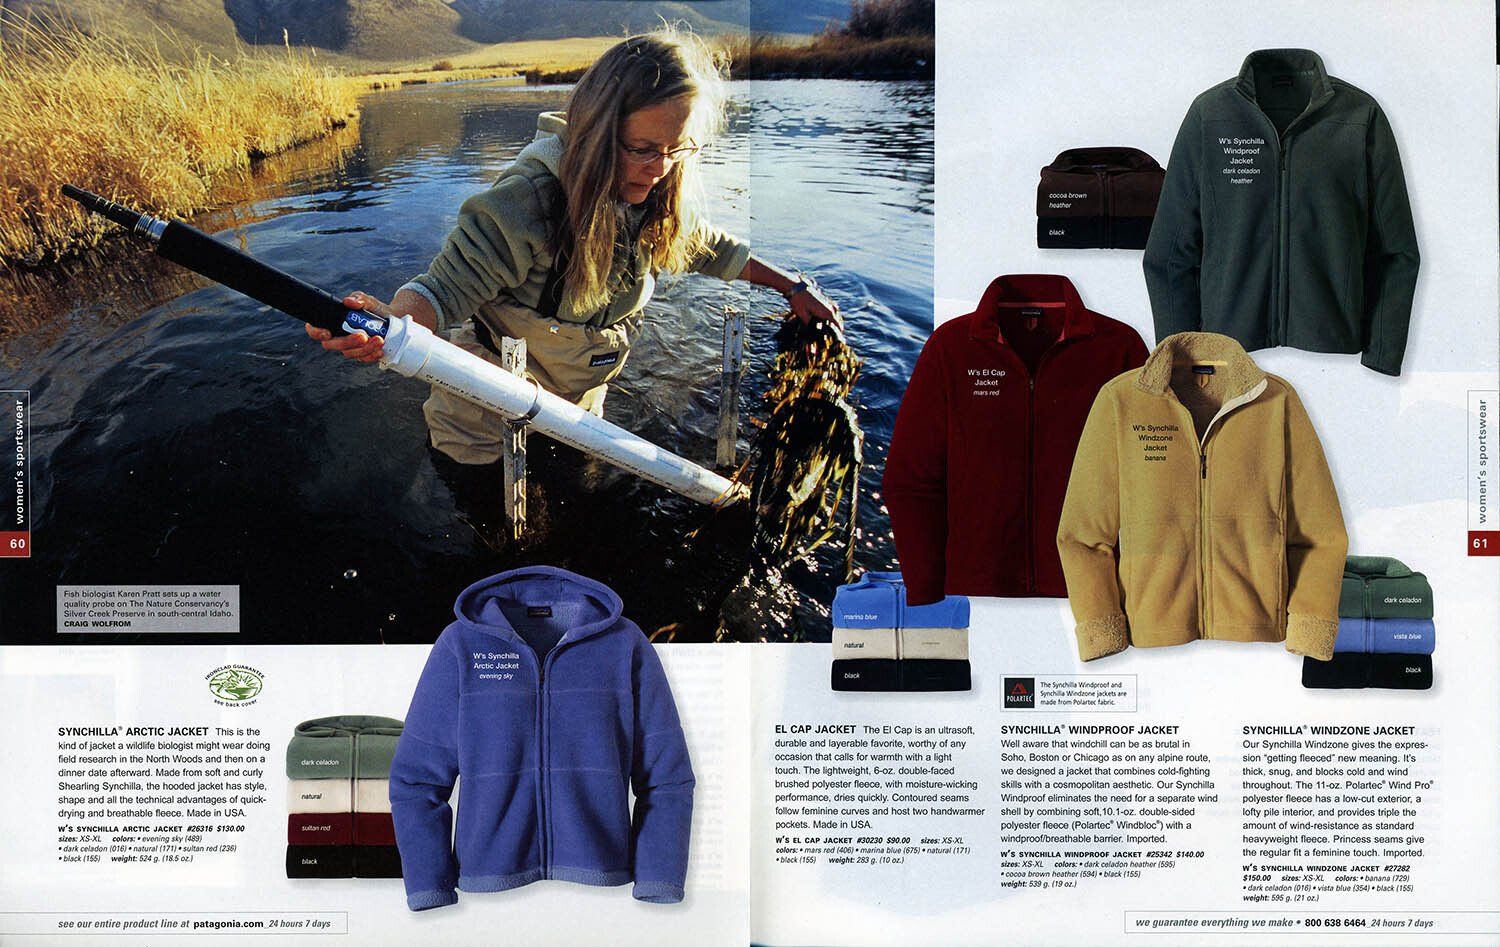 Patagonia Clothing Company, Silver Creek, Scientist, fish research, fishing, outdoor gear, apparel, 